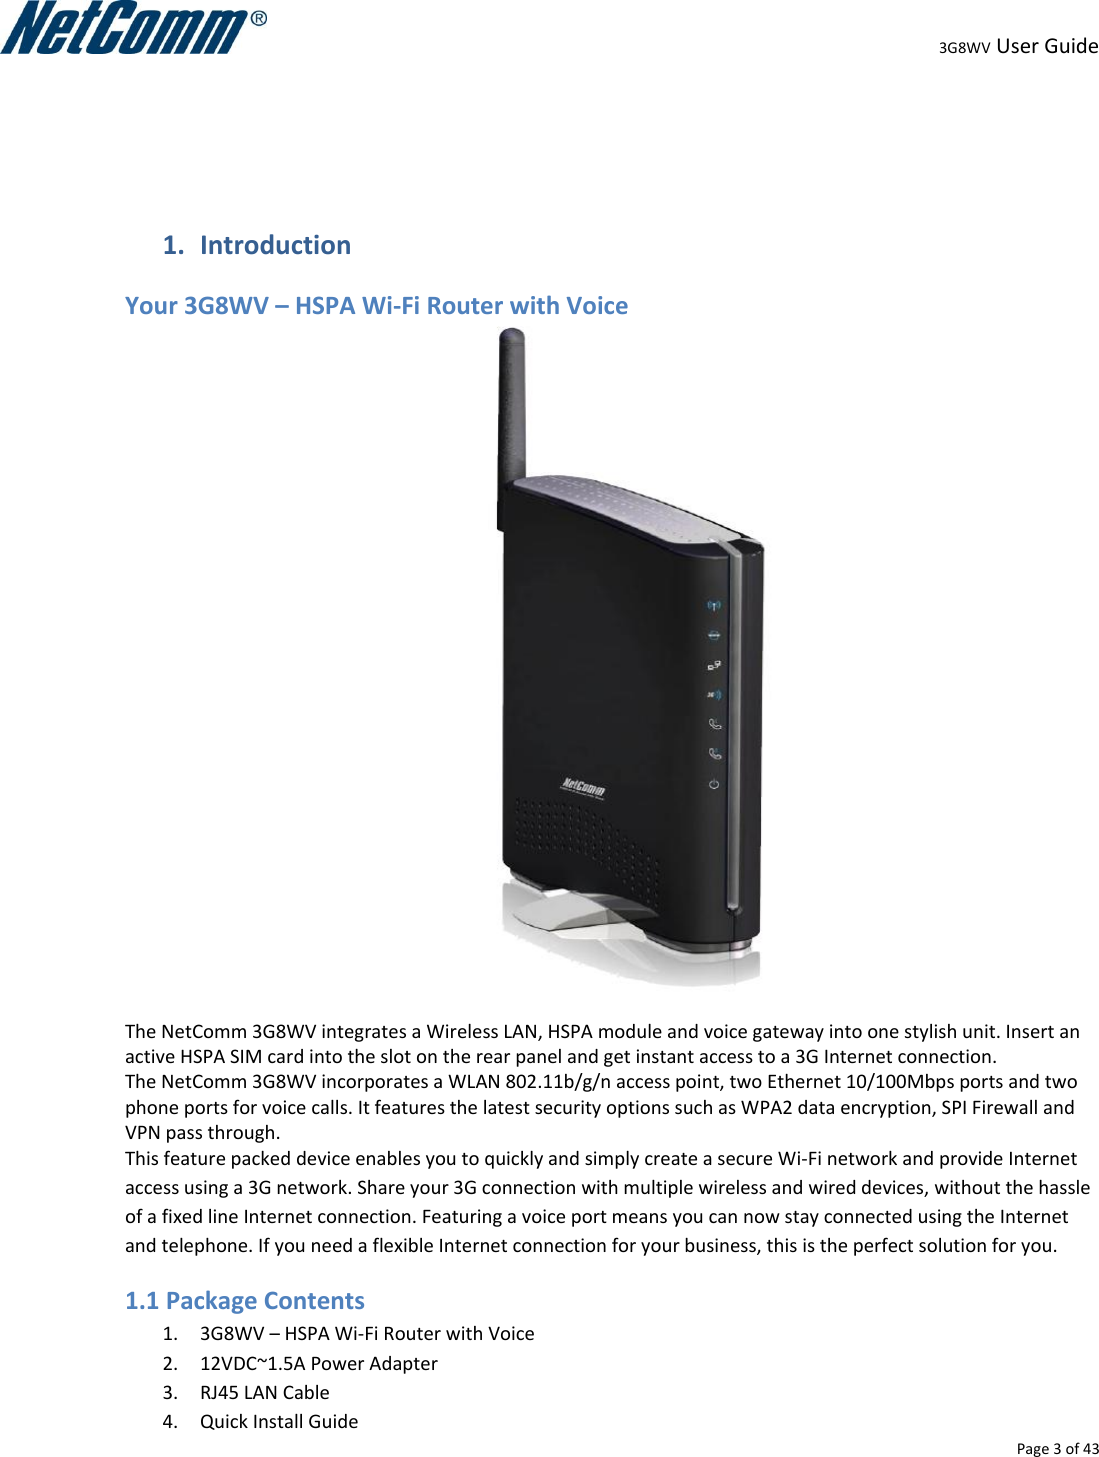                                                                                                                                                                                                                                                                                                                                                                                                3G8WV User Guide   Page 3 of 43    1. Introduction Your 3G8WV – HSPA Wi-Fi Router with Voice  The NetComm 3G8WV integrates a Wireless LAN, HSPA module and voice gateway into one stylish unit. Insert an active HSPA SIM card into the slot on the rear panel and get instant access to a 3G Internet connection. The NetComm 3G8WV incorporates a WLAN 802.11b/g/n access point, two Ethernet 10/100Mbps ports and two phone ports for voice calls. It features the latest security options such as WPA2 data encryption, SPI Firewall and VPN pass through. This feature packed device enables you to quickly and simply create a secure Wi-Fi network and provide Internet access using a 3G network. Share your 3G connection with multiple wireless and wired devices, without the hassle of a fixed line Internet connection. Featuring a voice port means you can now stay connected using the Internet and telephone. If you need a flexible Internet connection for your business, this is the perfect solution for you. 1.1 Package Contents 1. 3G8WV – HSPA Wi-Fi Router with Voice 2. 12VDC~1.5A Power Adapter 3. RJ45 LAN Cable 4. Quick Install Guide 